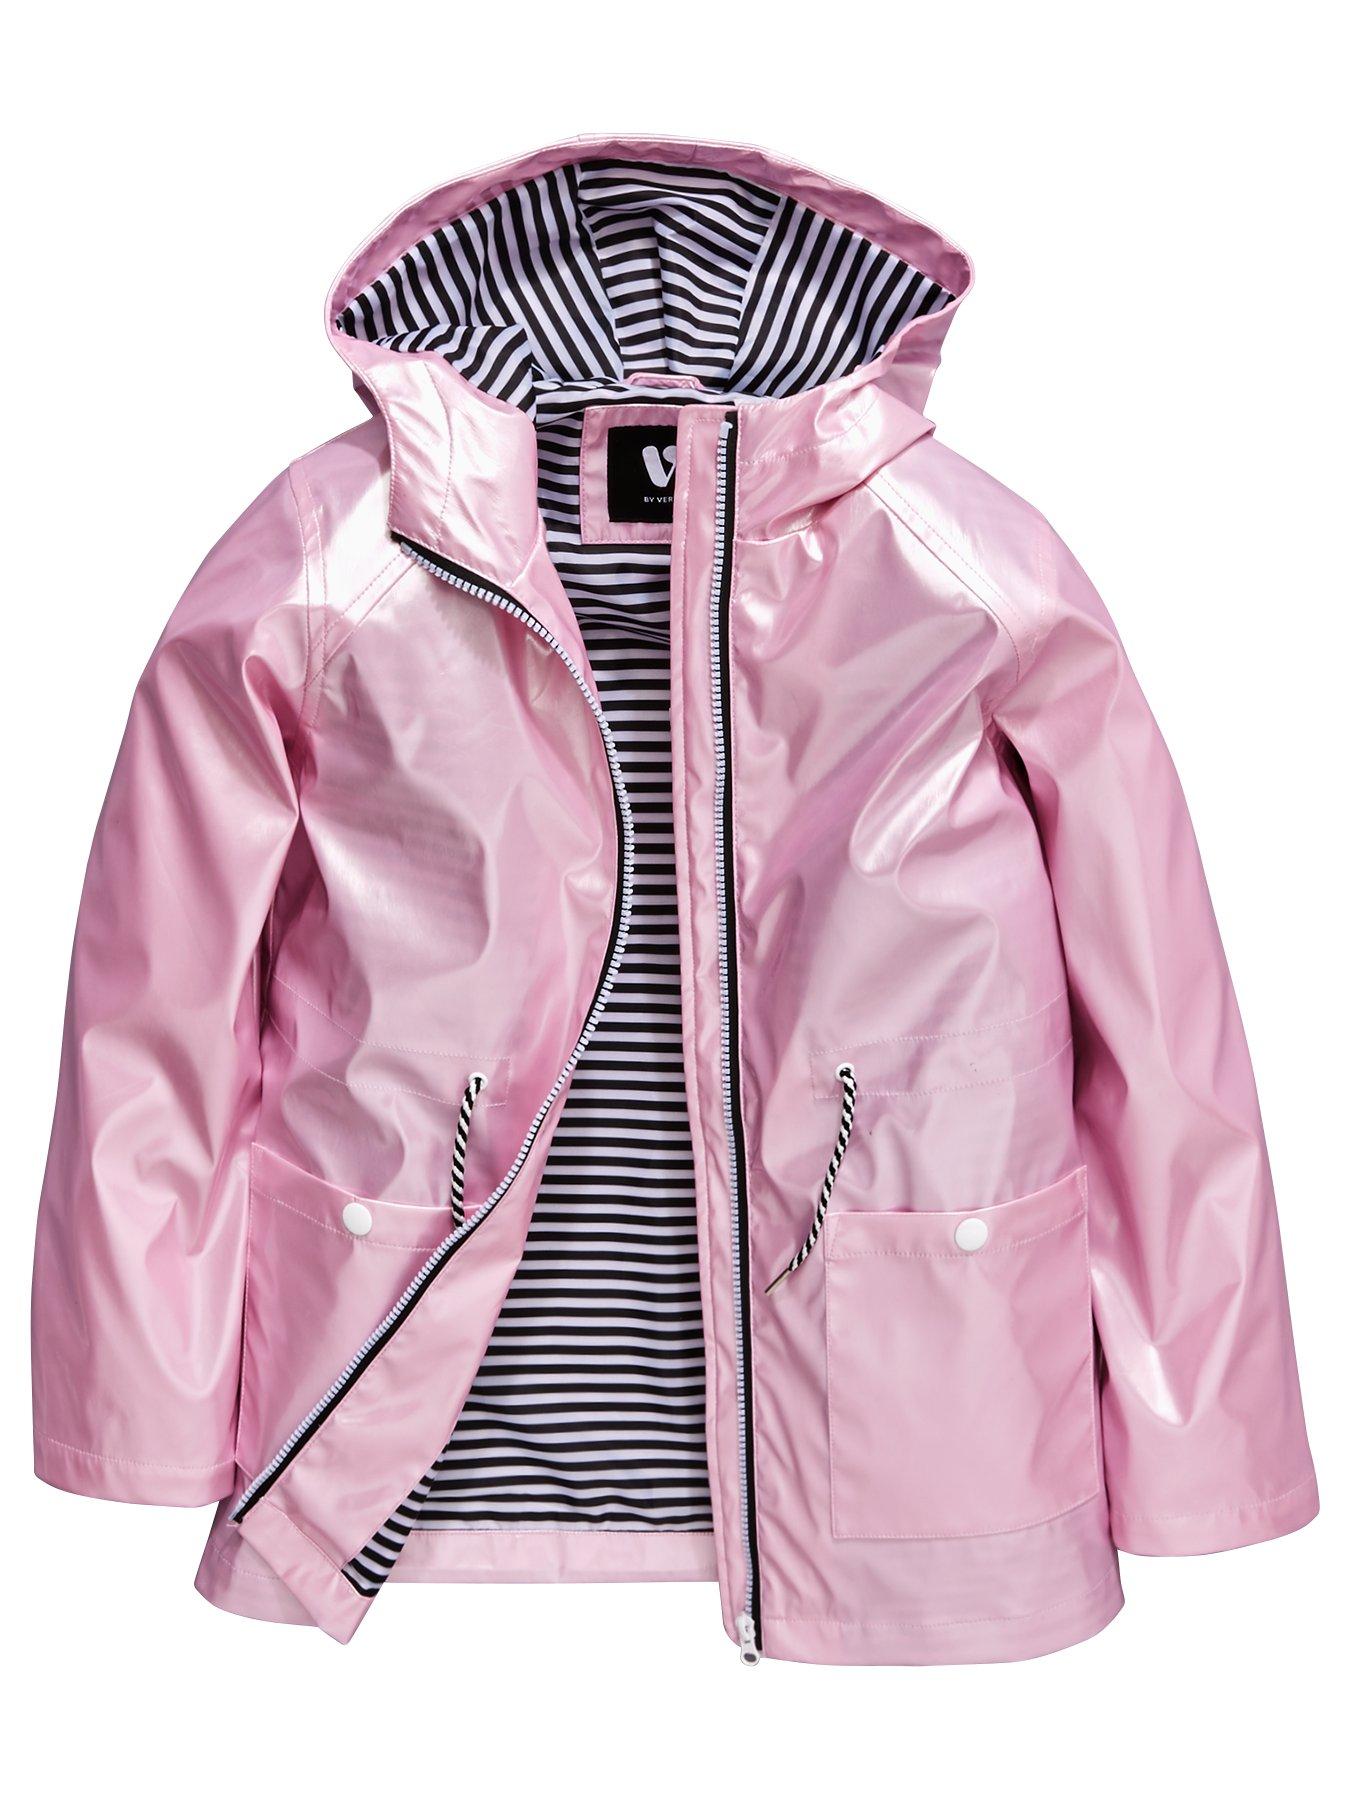 Girls coats and jackets at Very.co.uk